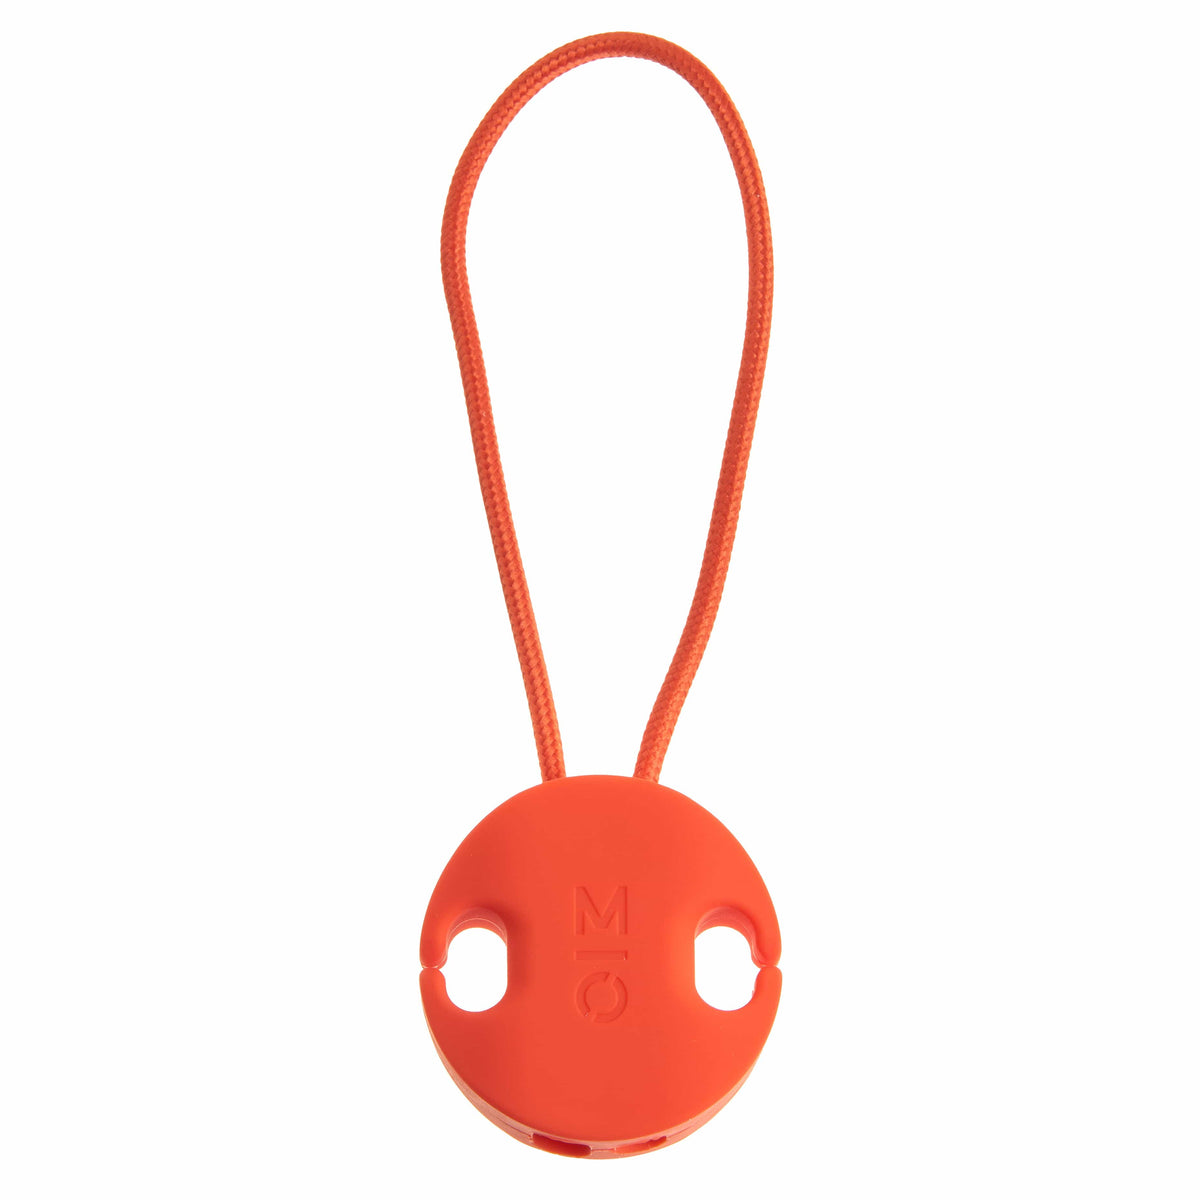 Motile Sport Cord Charger - Red Orange Motile Electronics 38553